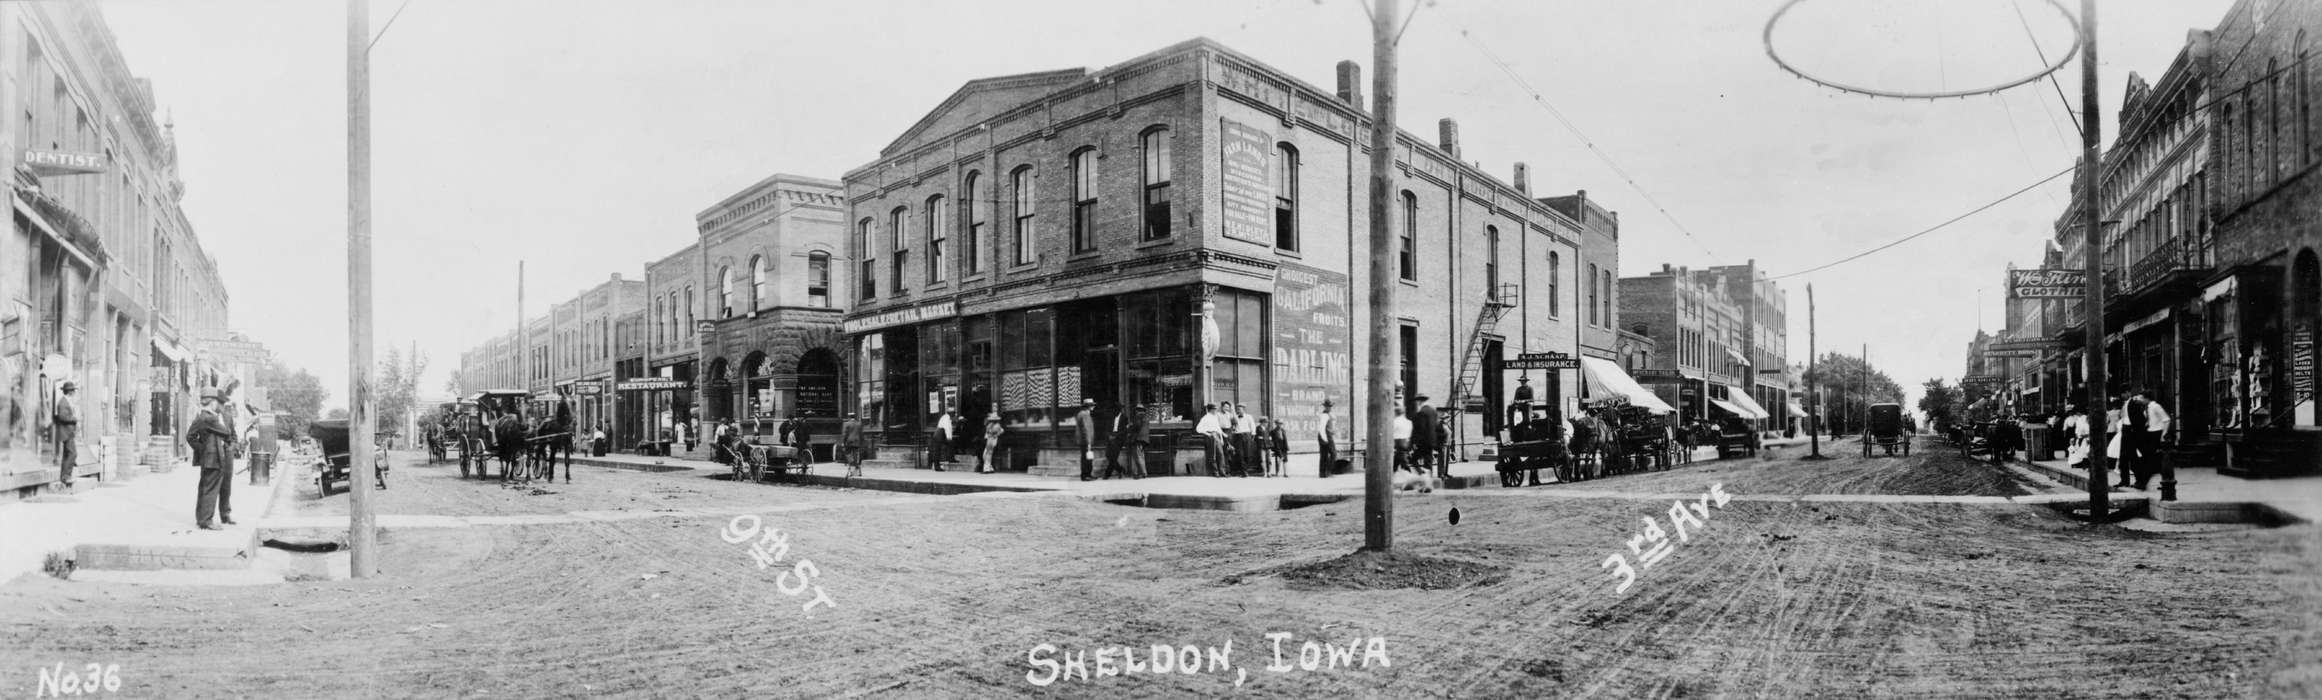 Businesses and Factories, Children, Leisure, storefront, panoramic, Iowa History, mainstreet, dirt street, brick building, Iowa, Library of Congress, horse and buggy, Main Streets & Town Squares, Cities and Towns, history of Iowa